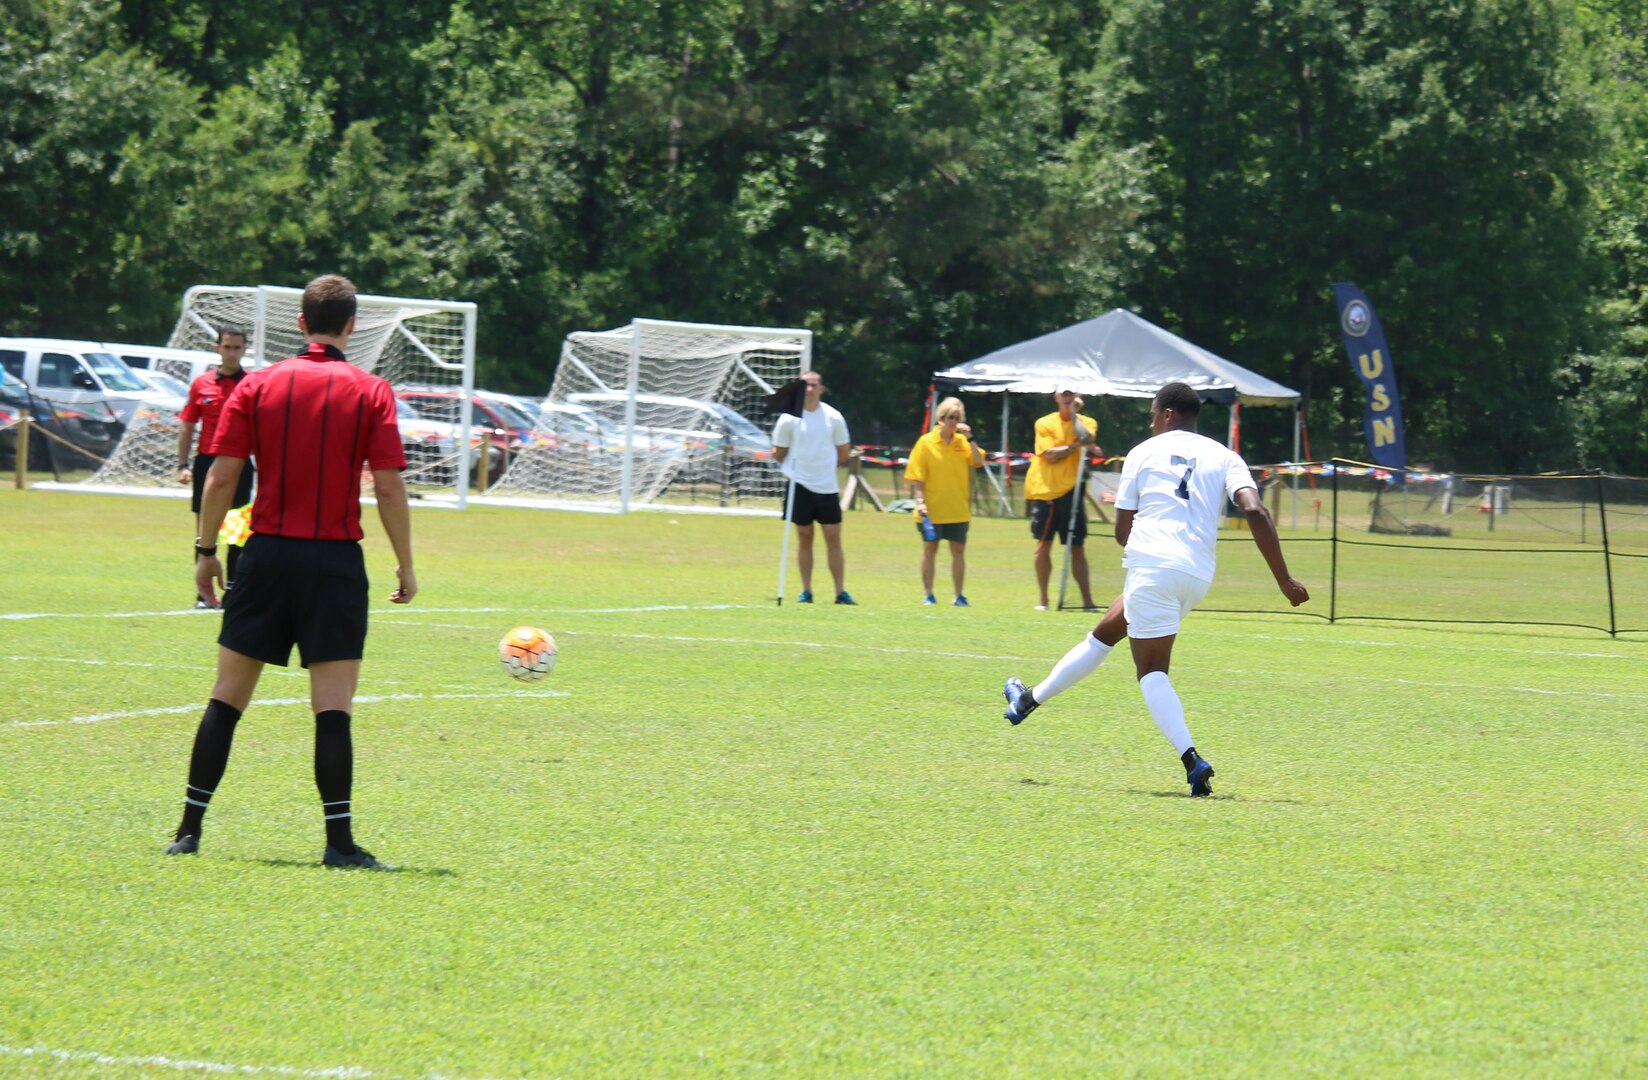 Fort Benning, Ga. - Navy PO2 Kyle Baker scores a late goal on a penalty kick in the 89th minute of the championship match of the 2016 Armed Forces Men's Soccer Championship hosted at Fort Benning, Ga from 6-14 May 2016.  Air Force would win the Championship 3-2, with Navy taking silver.